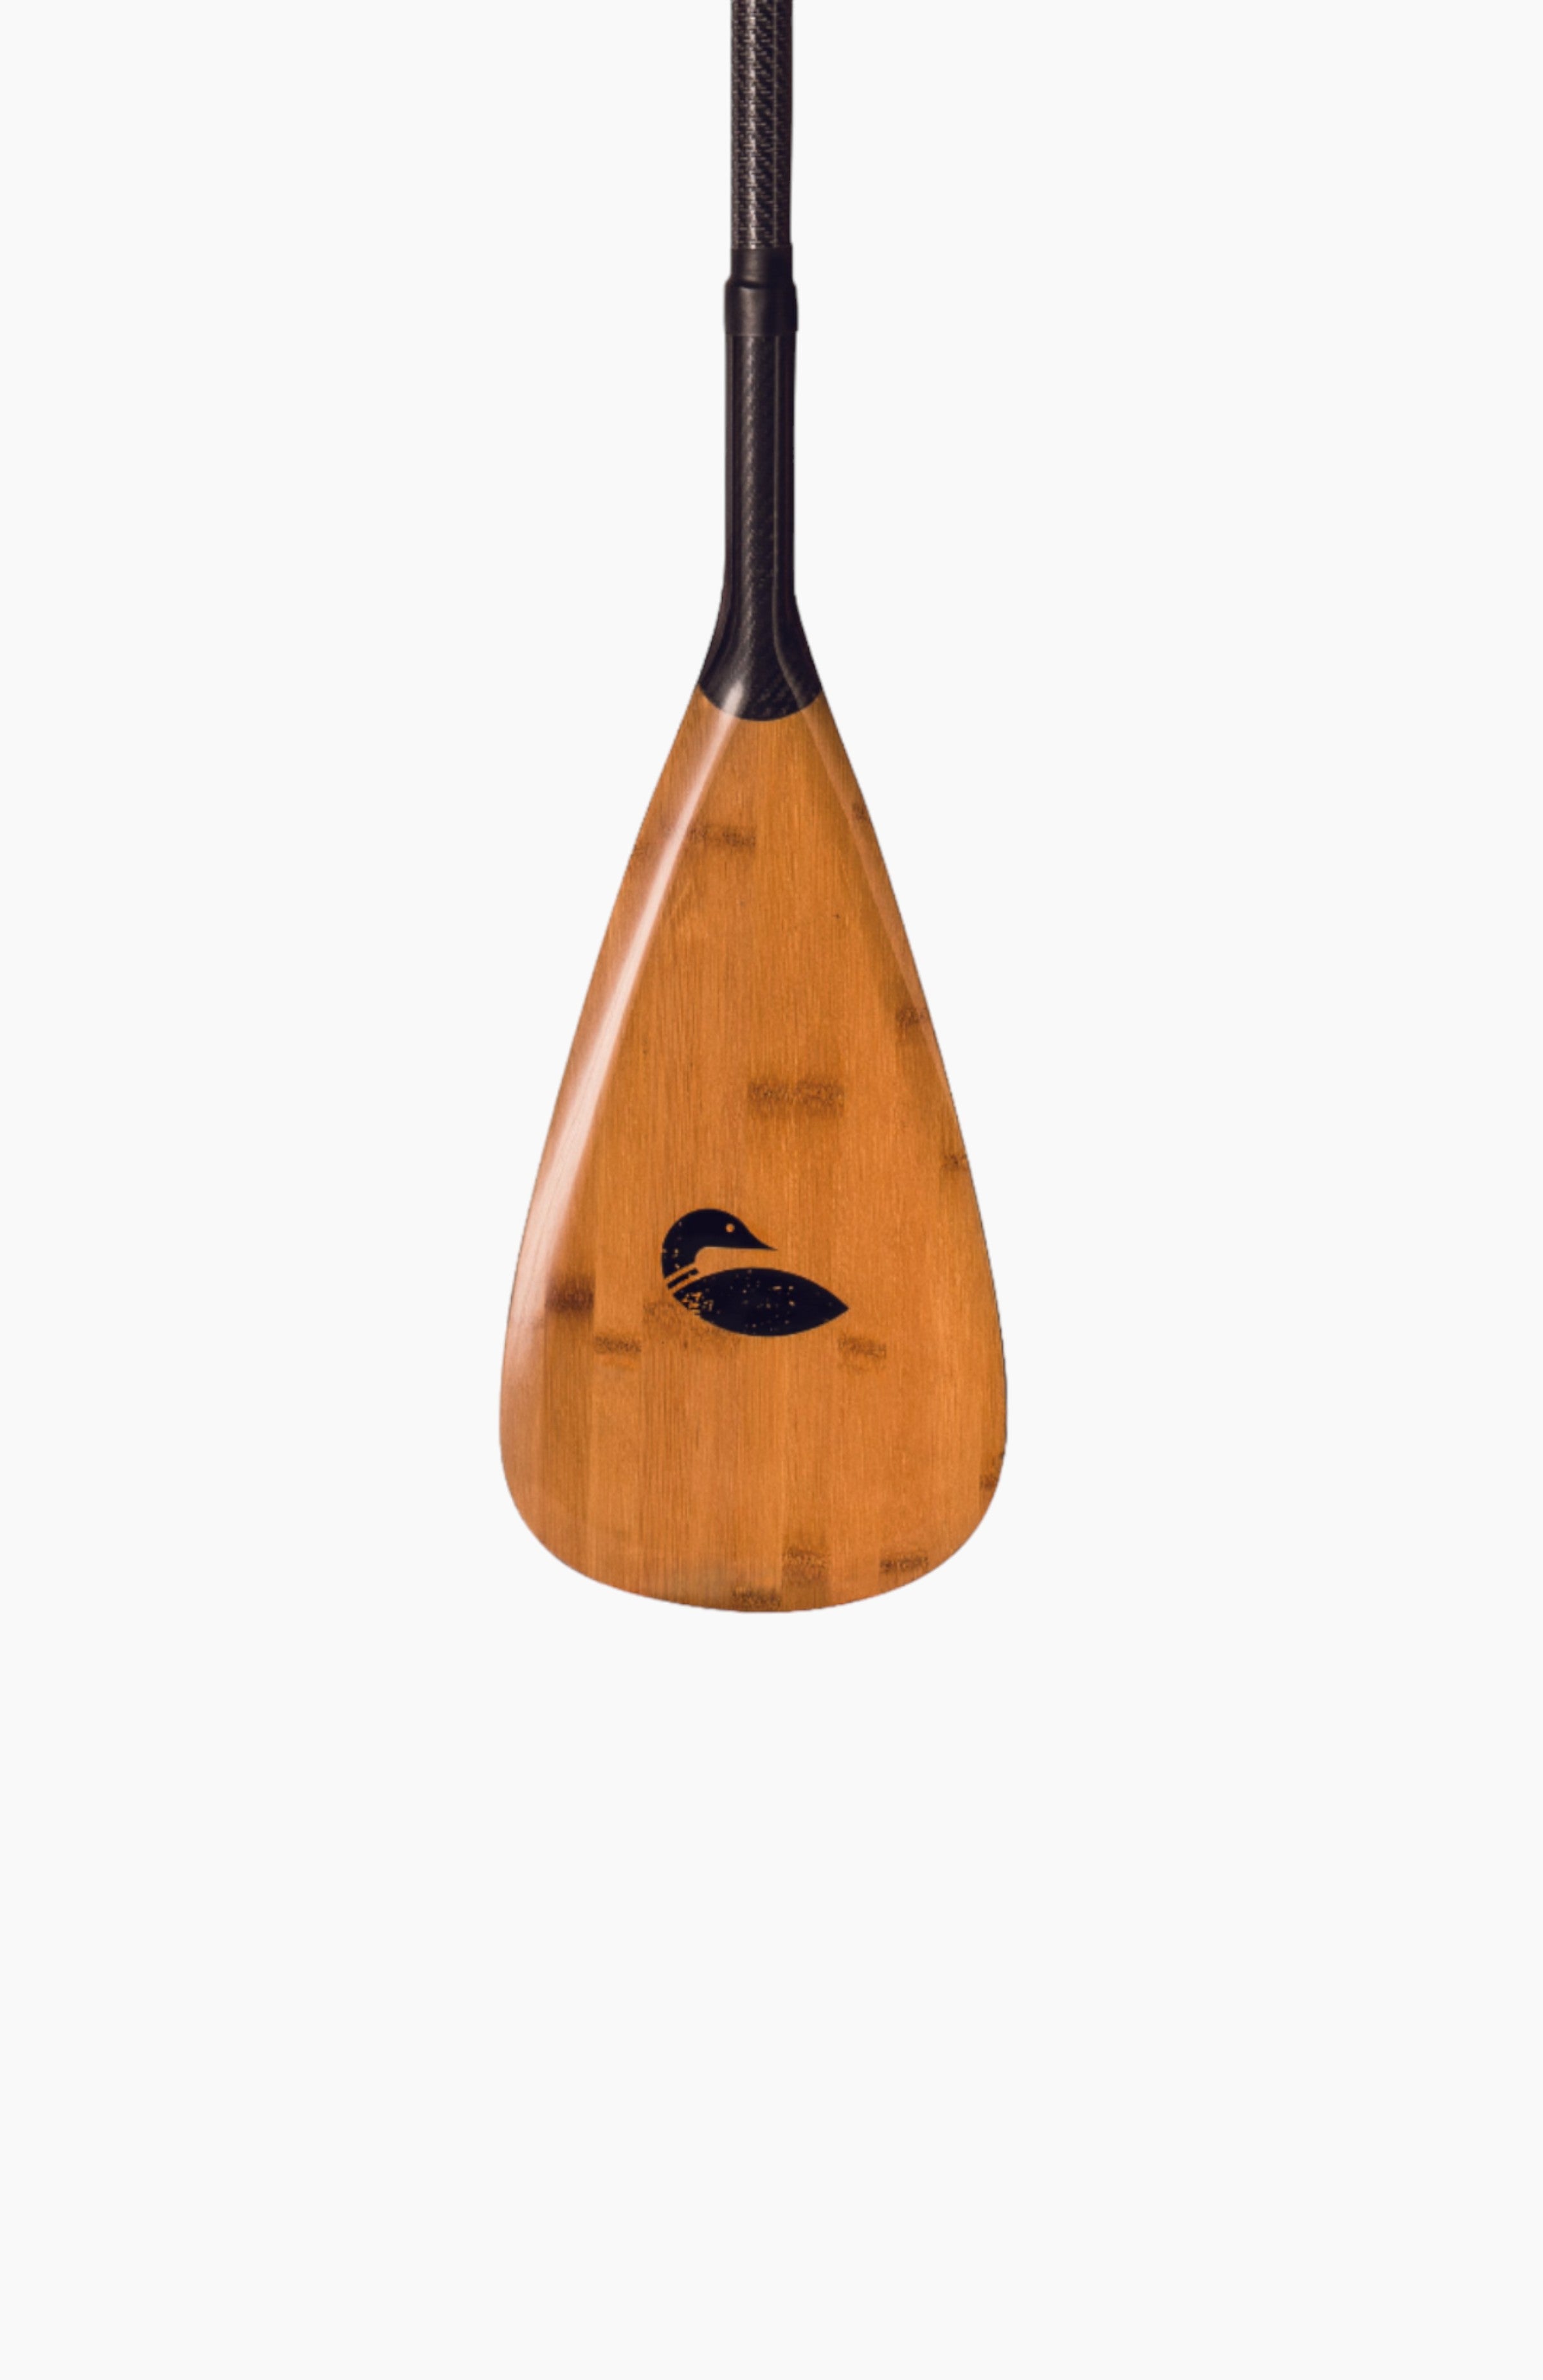 Paddle board accessories: A wood paddle and black micro fiber handle.